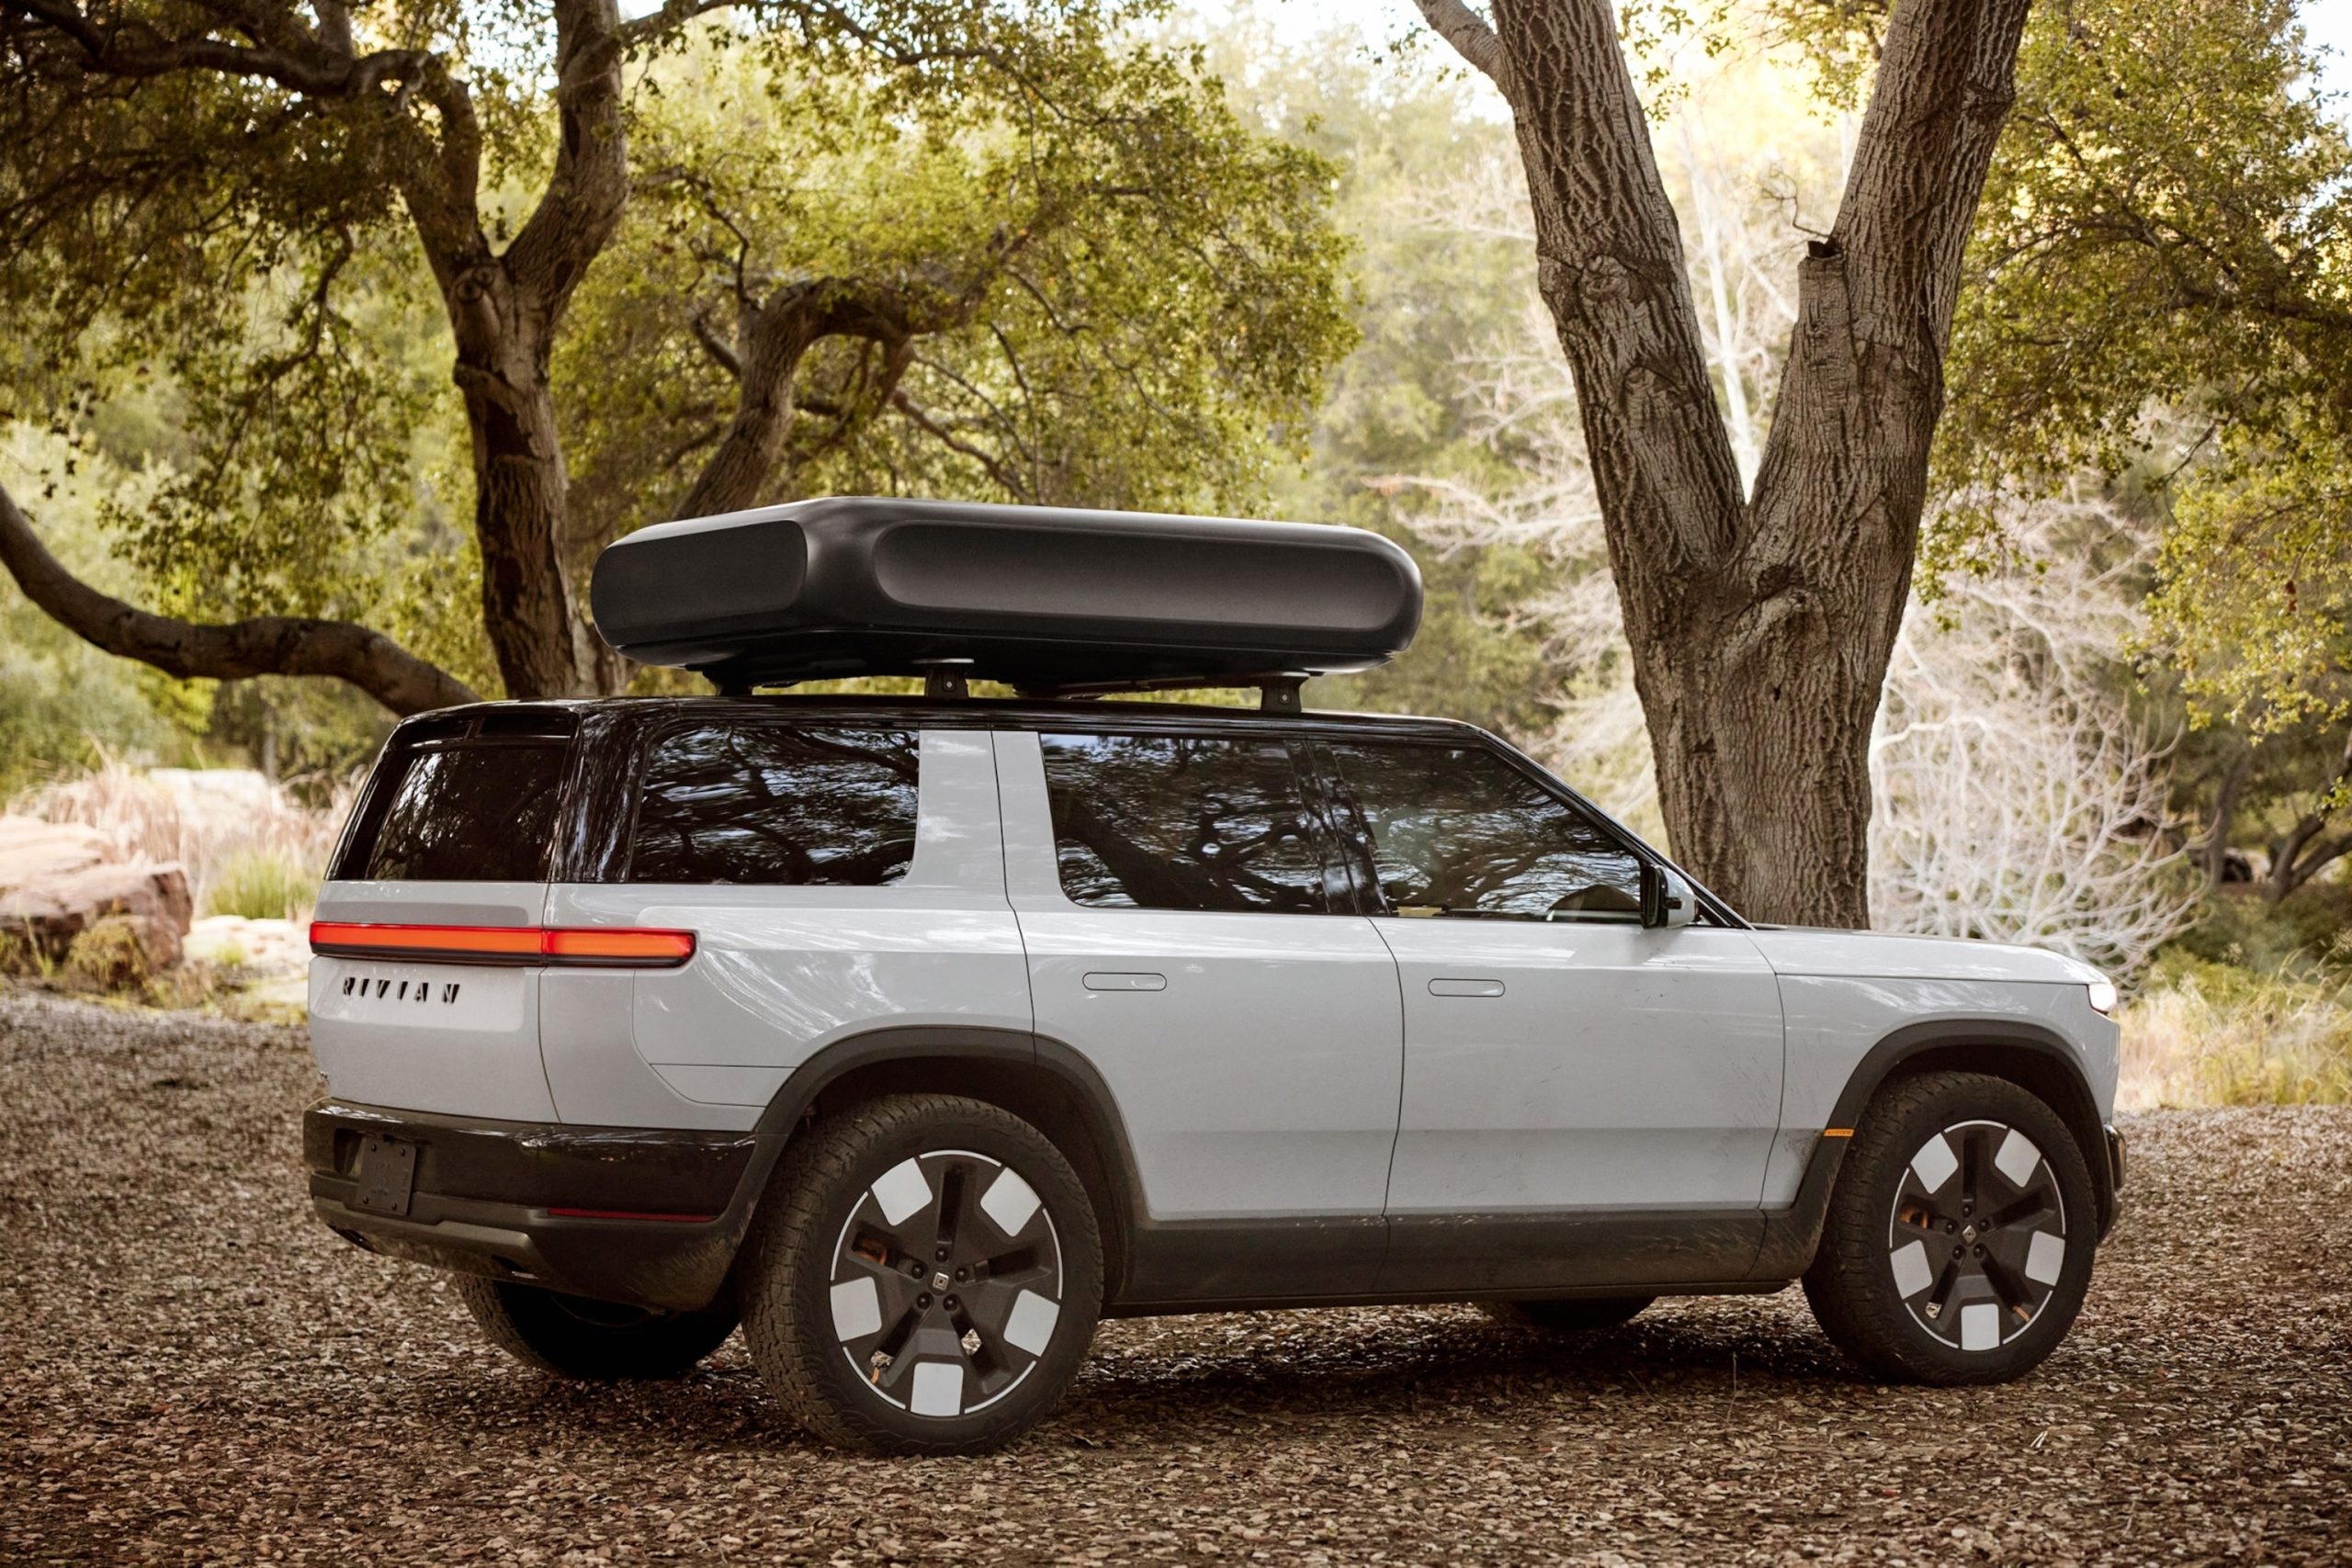 Rivian CEO RJ Scaringe Discusses Changing Mindsets in Electric Vehicle Innovation